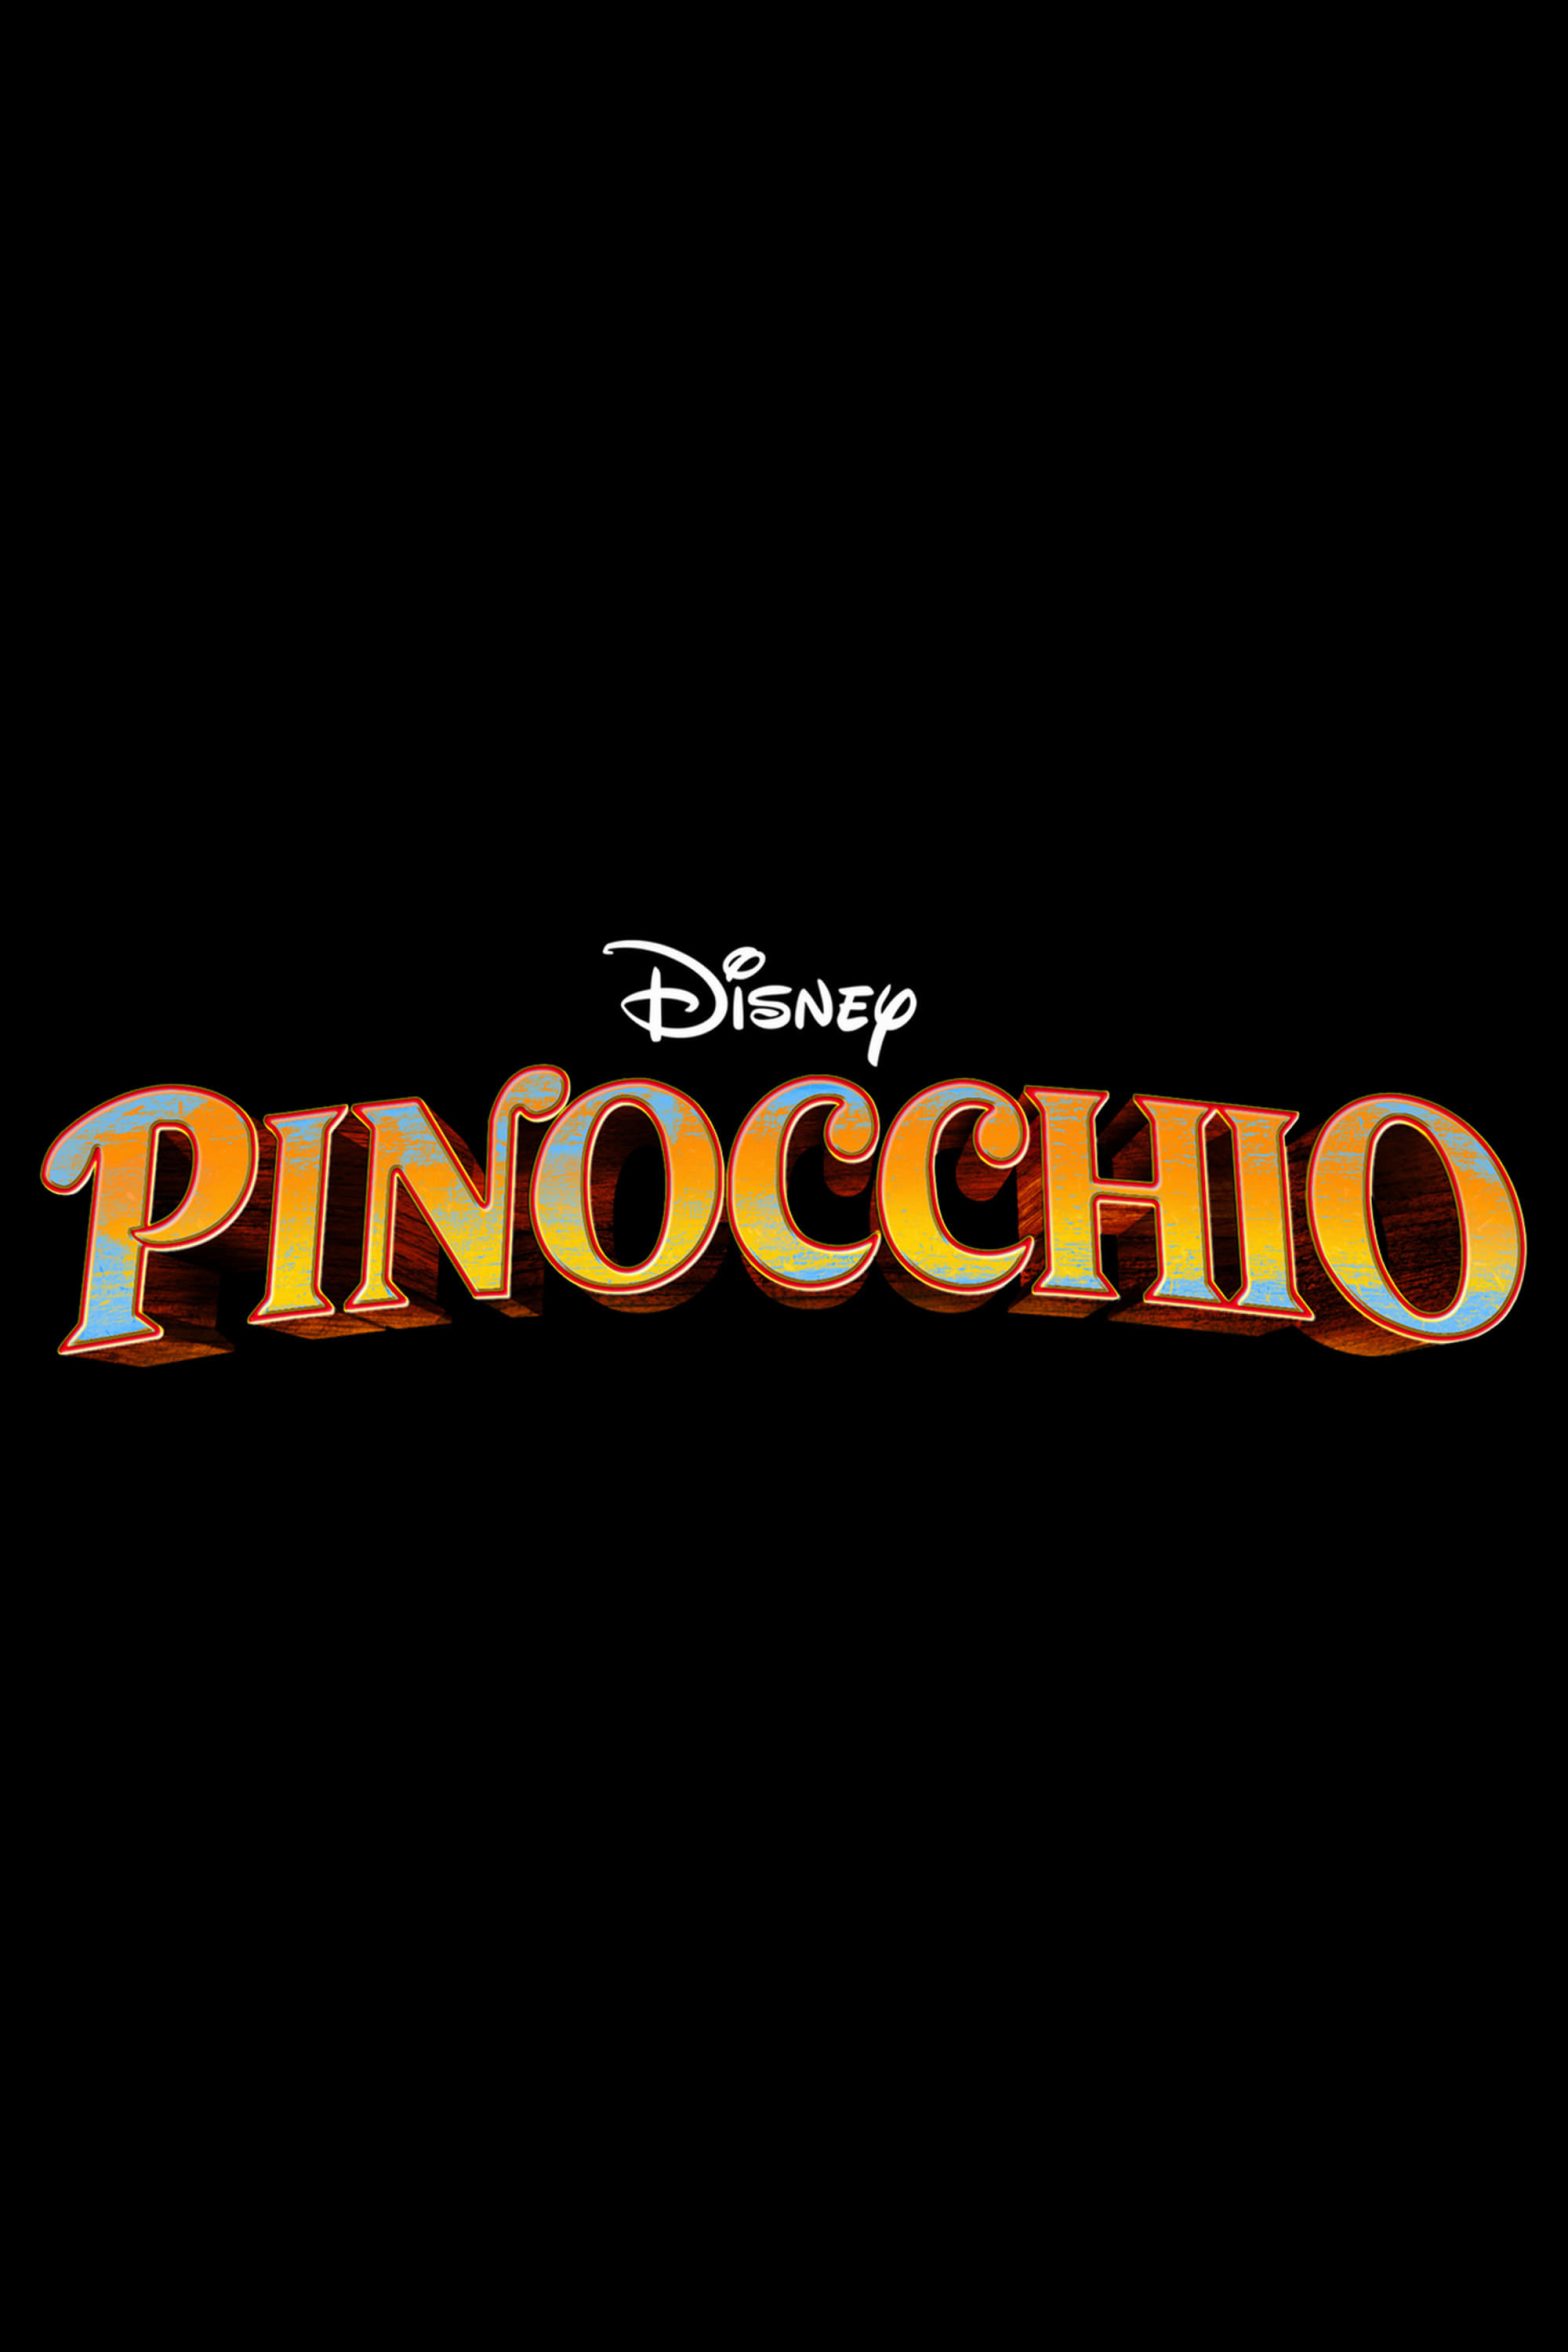 Poster for the movie "Pinocchio"